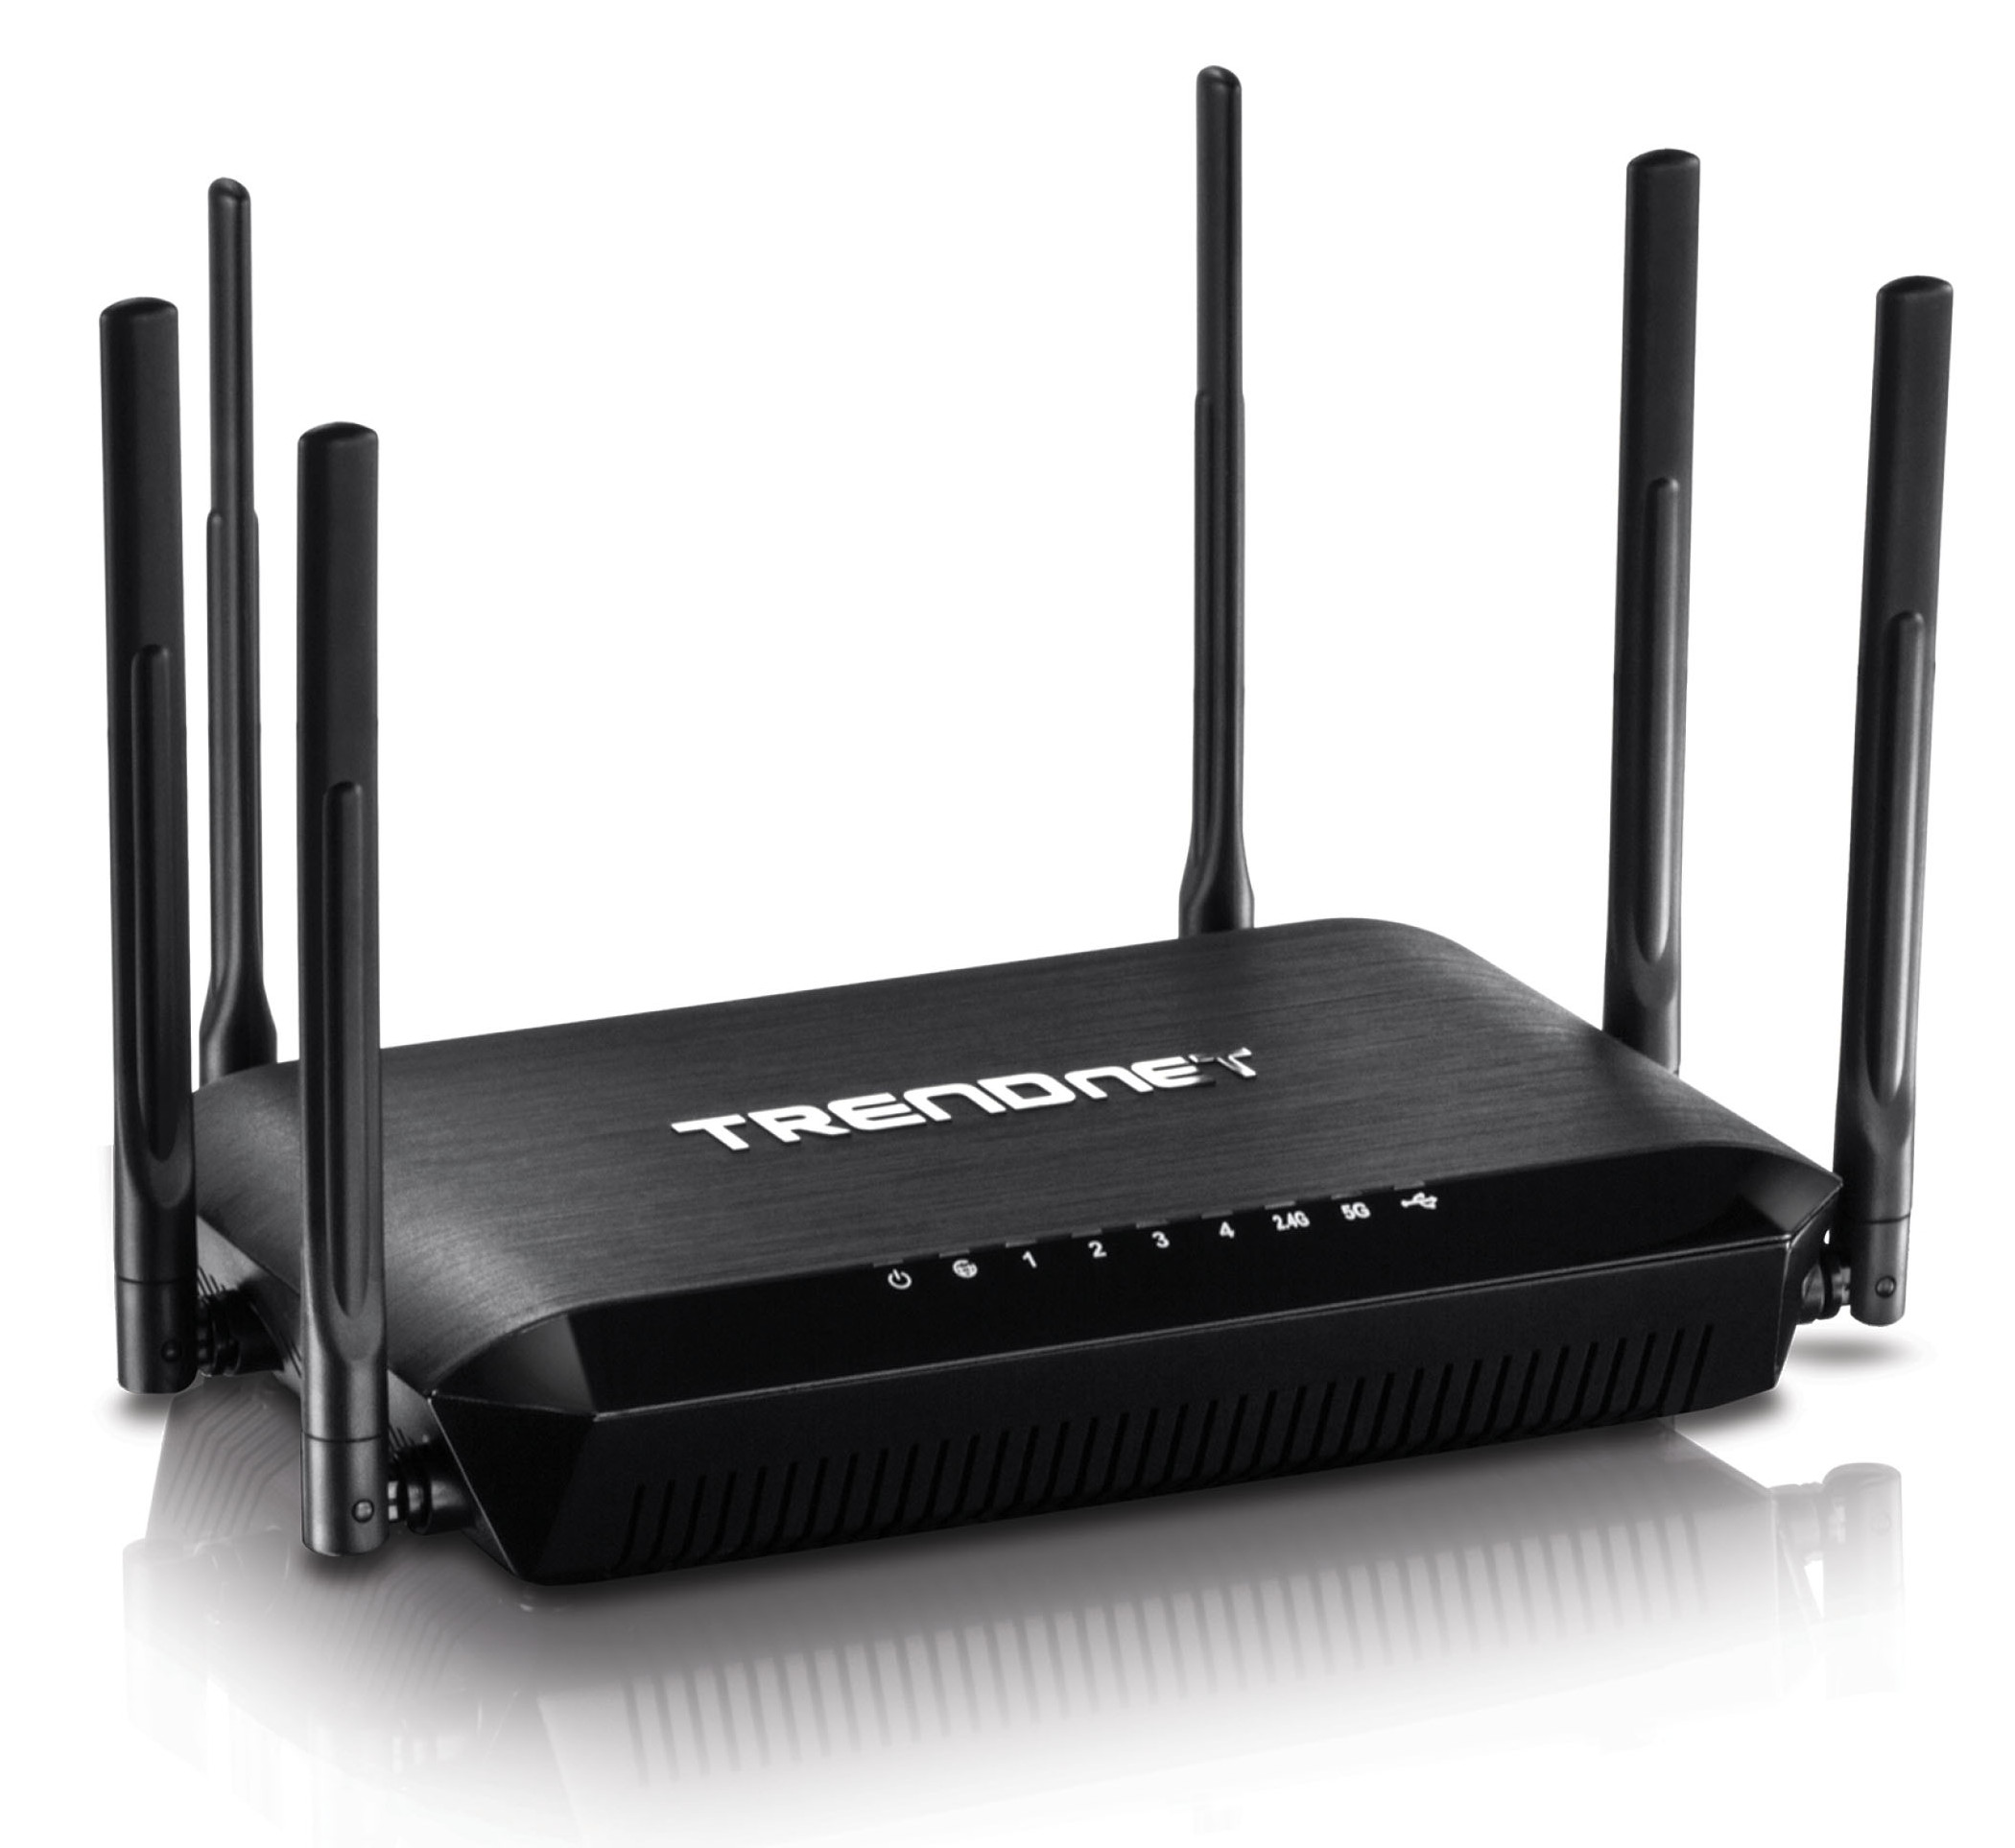 Beskrivende Tutor Bekendtgørelse TRENDnet Launches AC3200 Tri Band Wireless Router | TechPowerUp